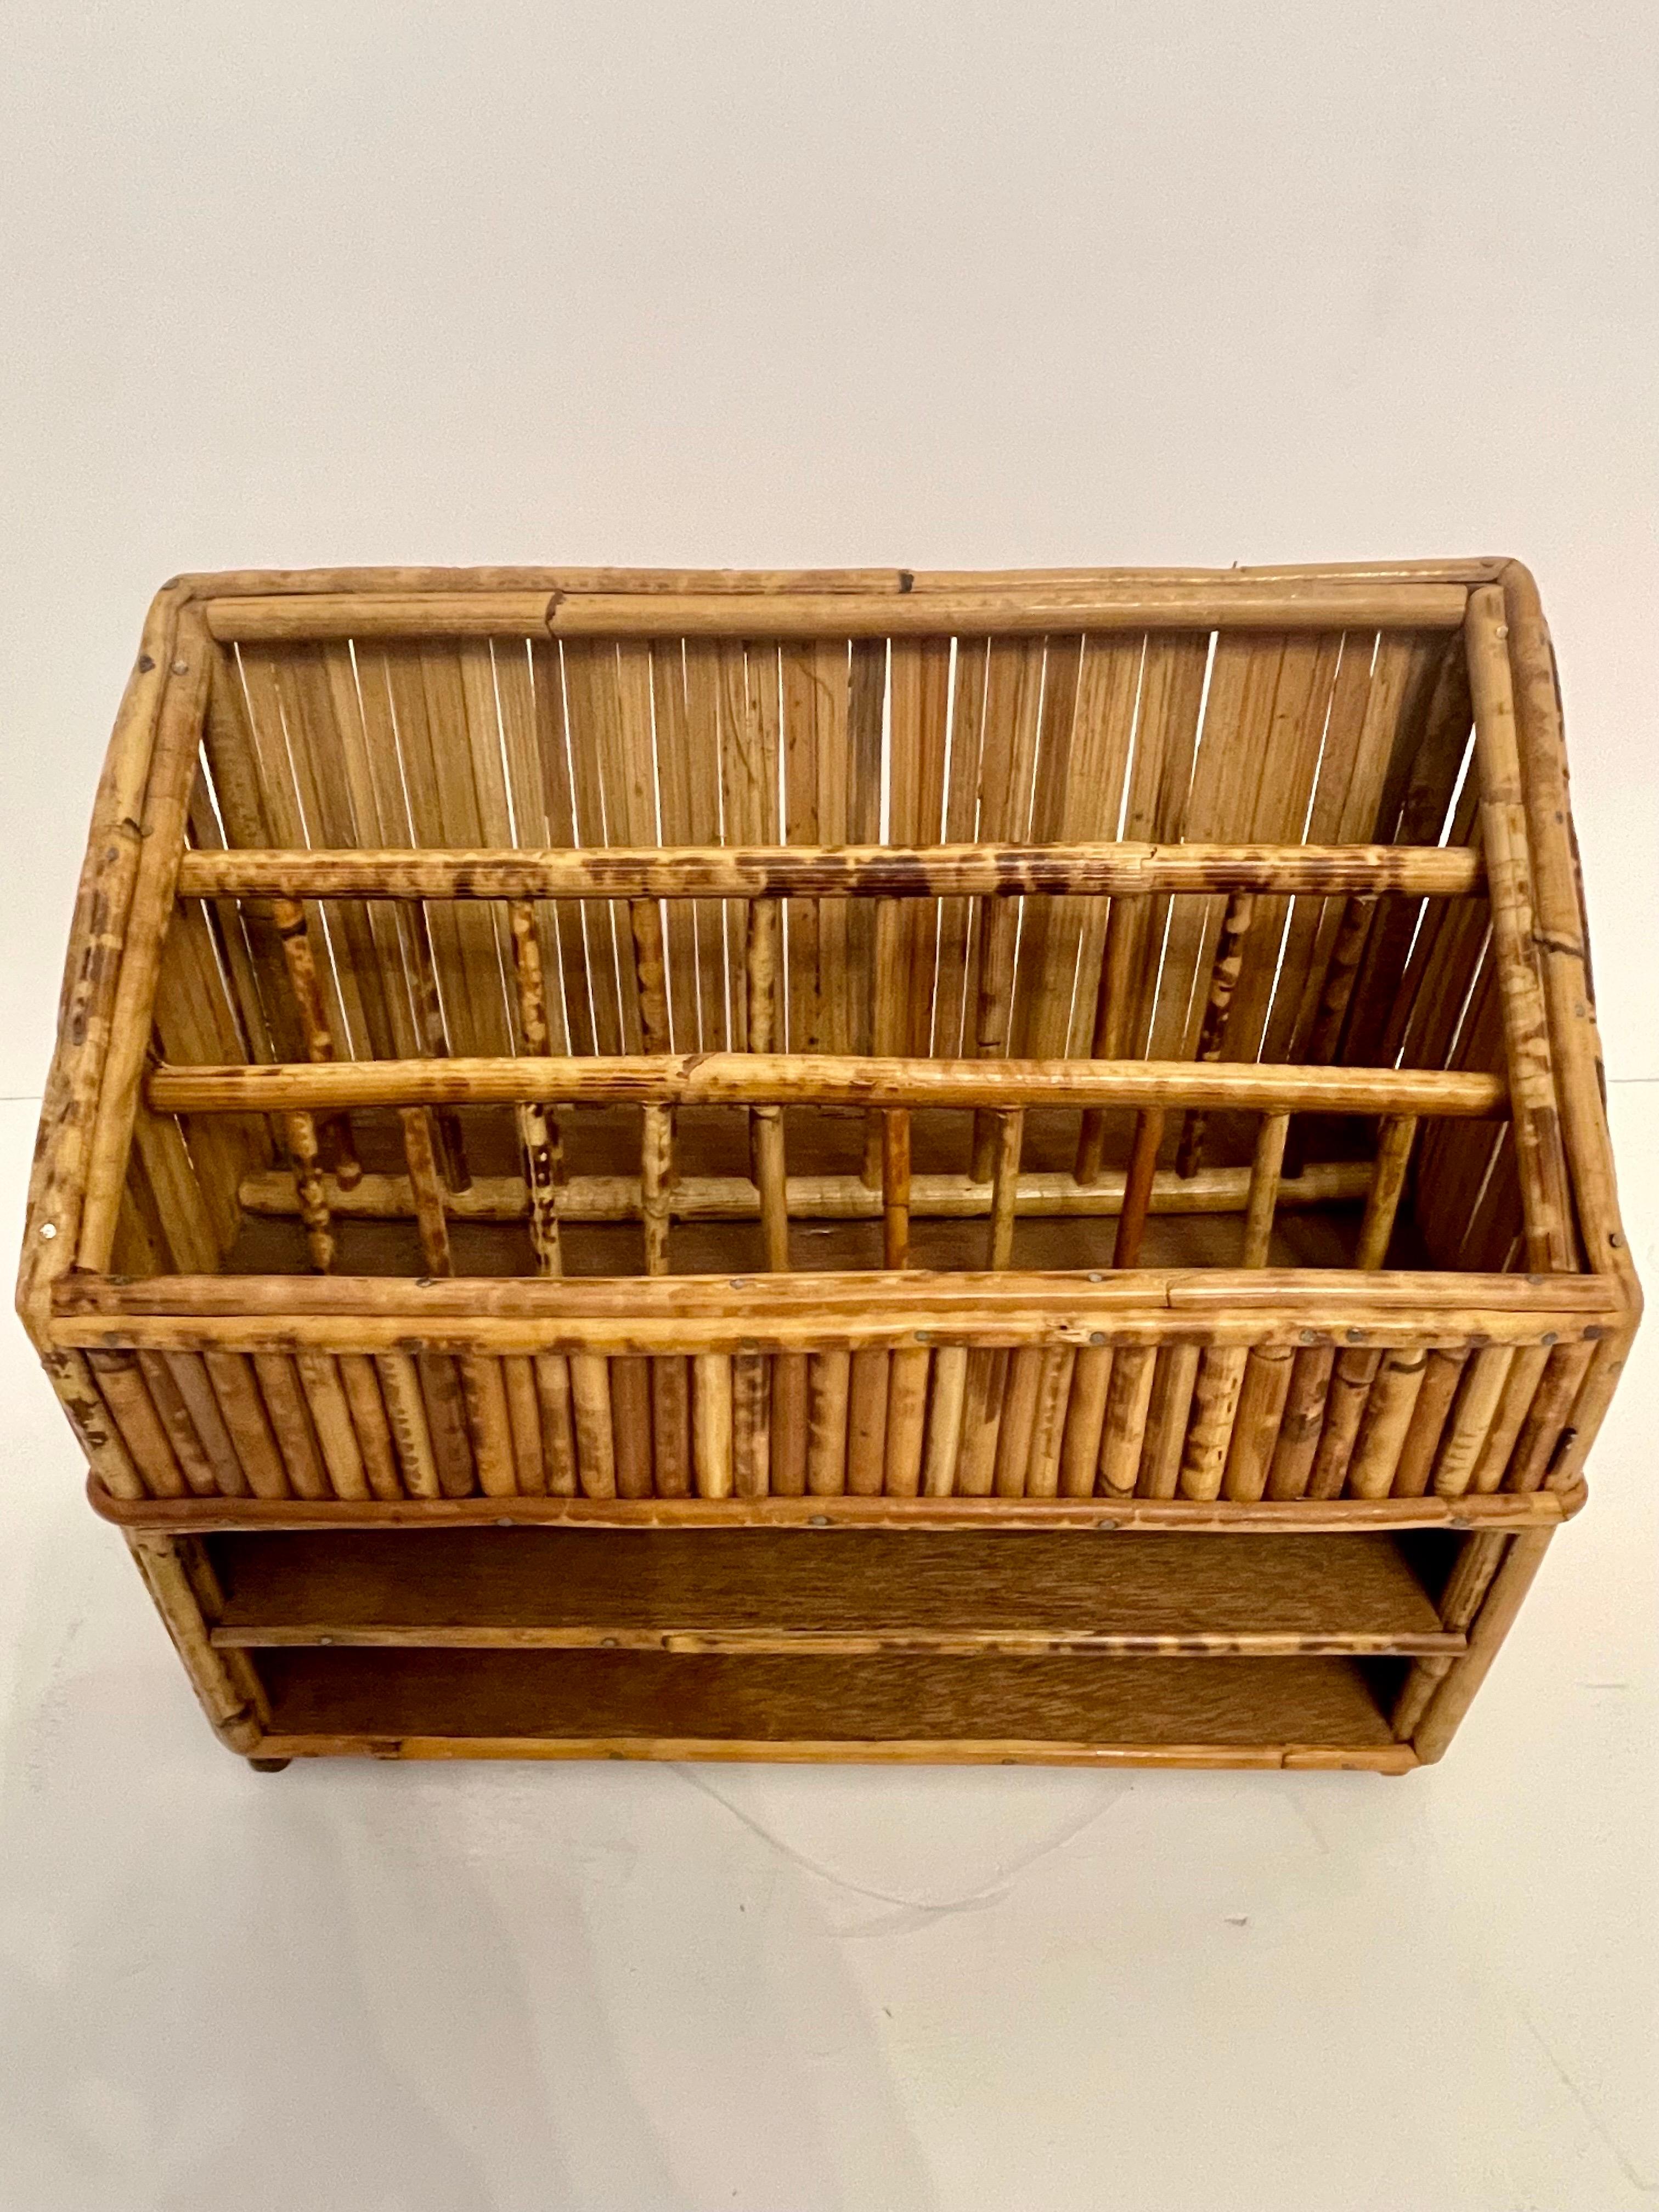 Vintage Bamboo Letter Holder Desk Organizer In Good Condition For Sale In New York, NY